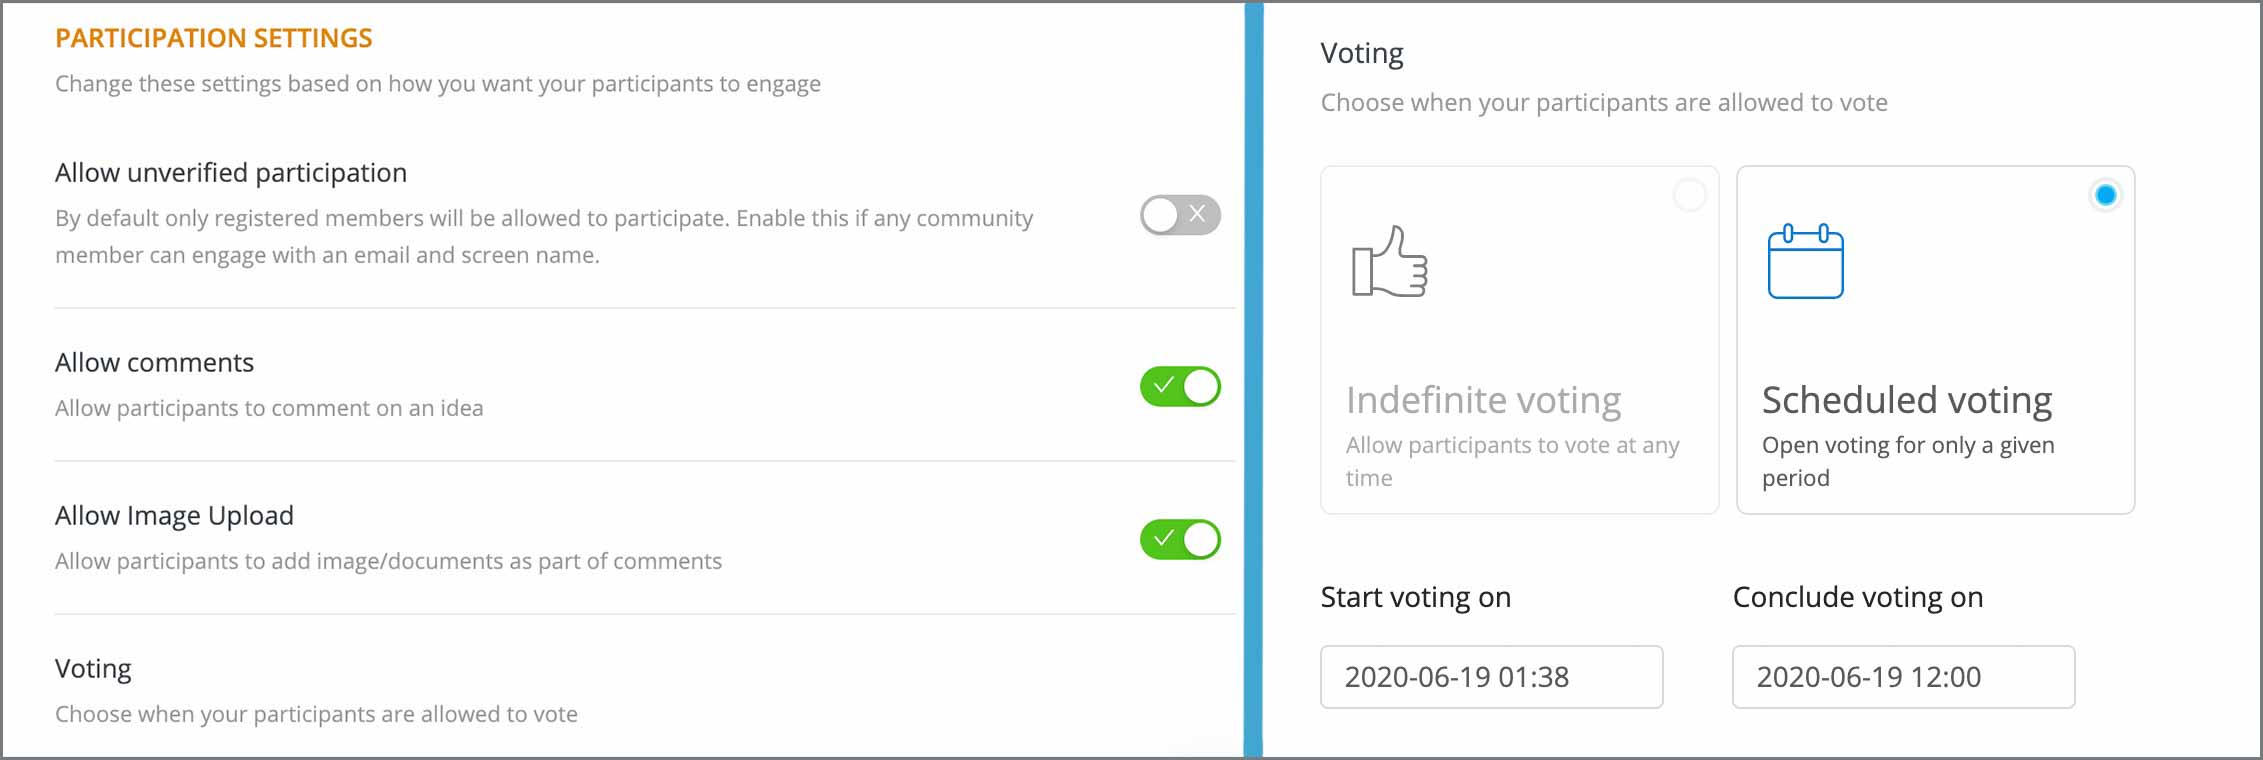 Permission toggles and Scheduled voting